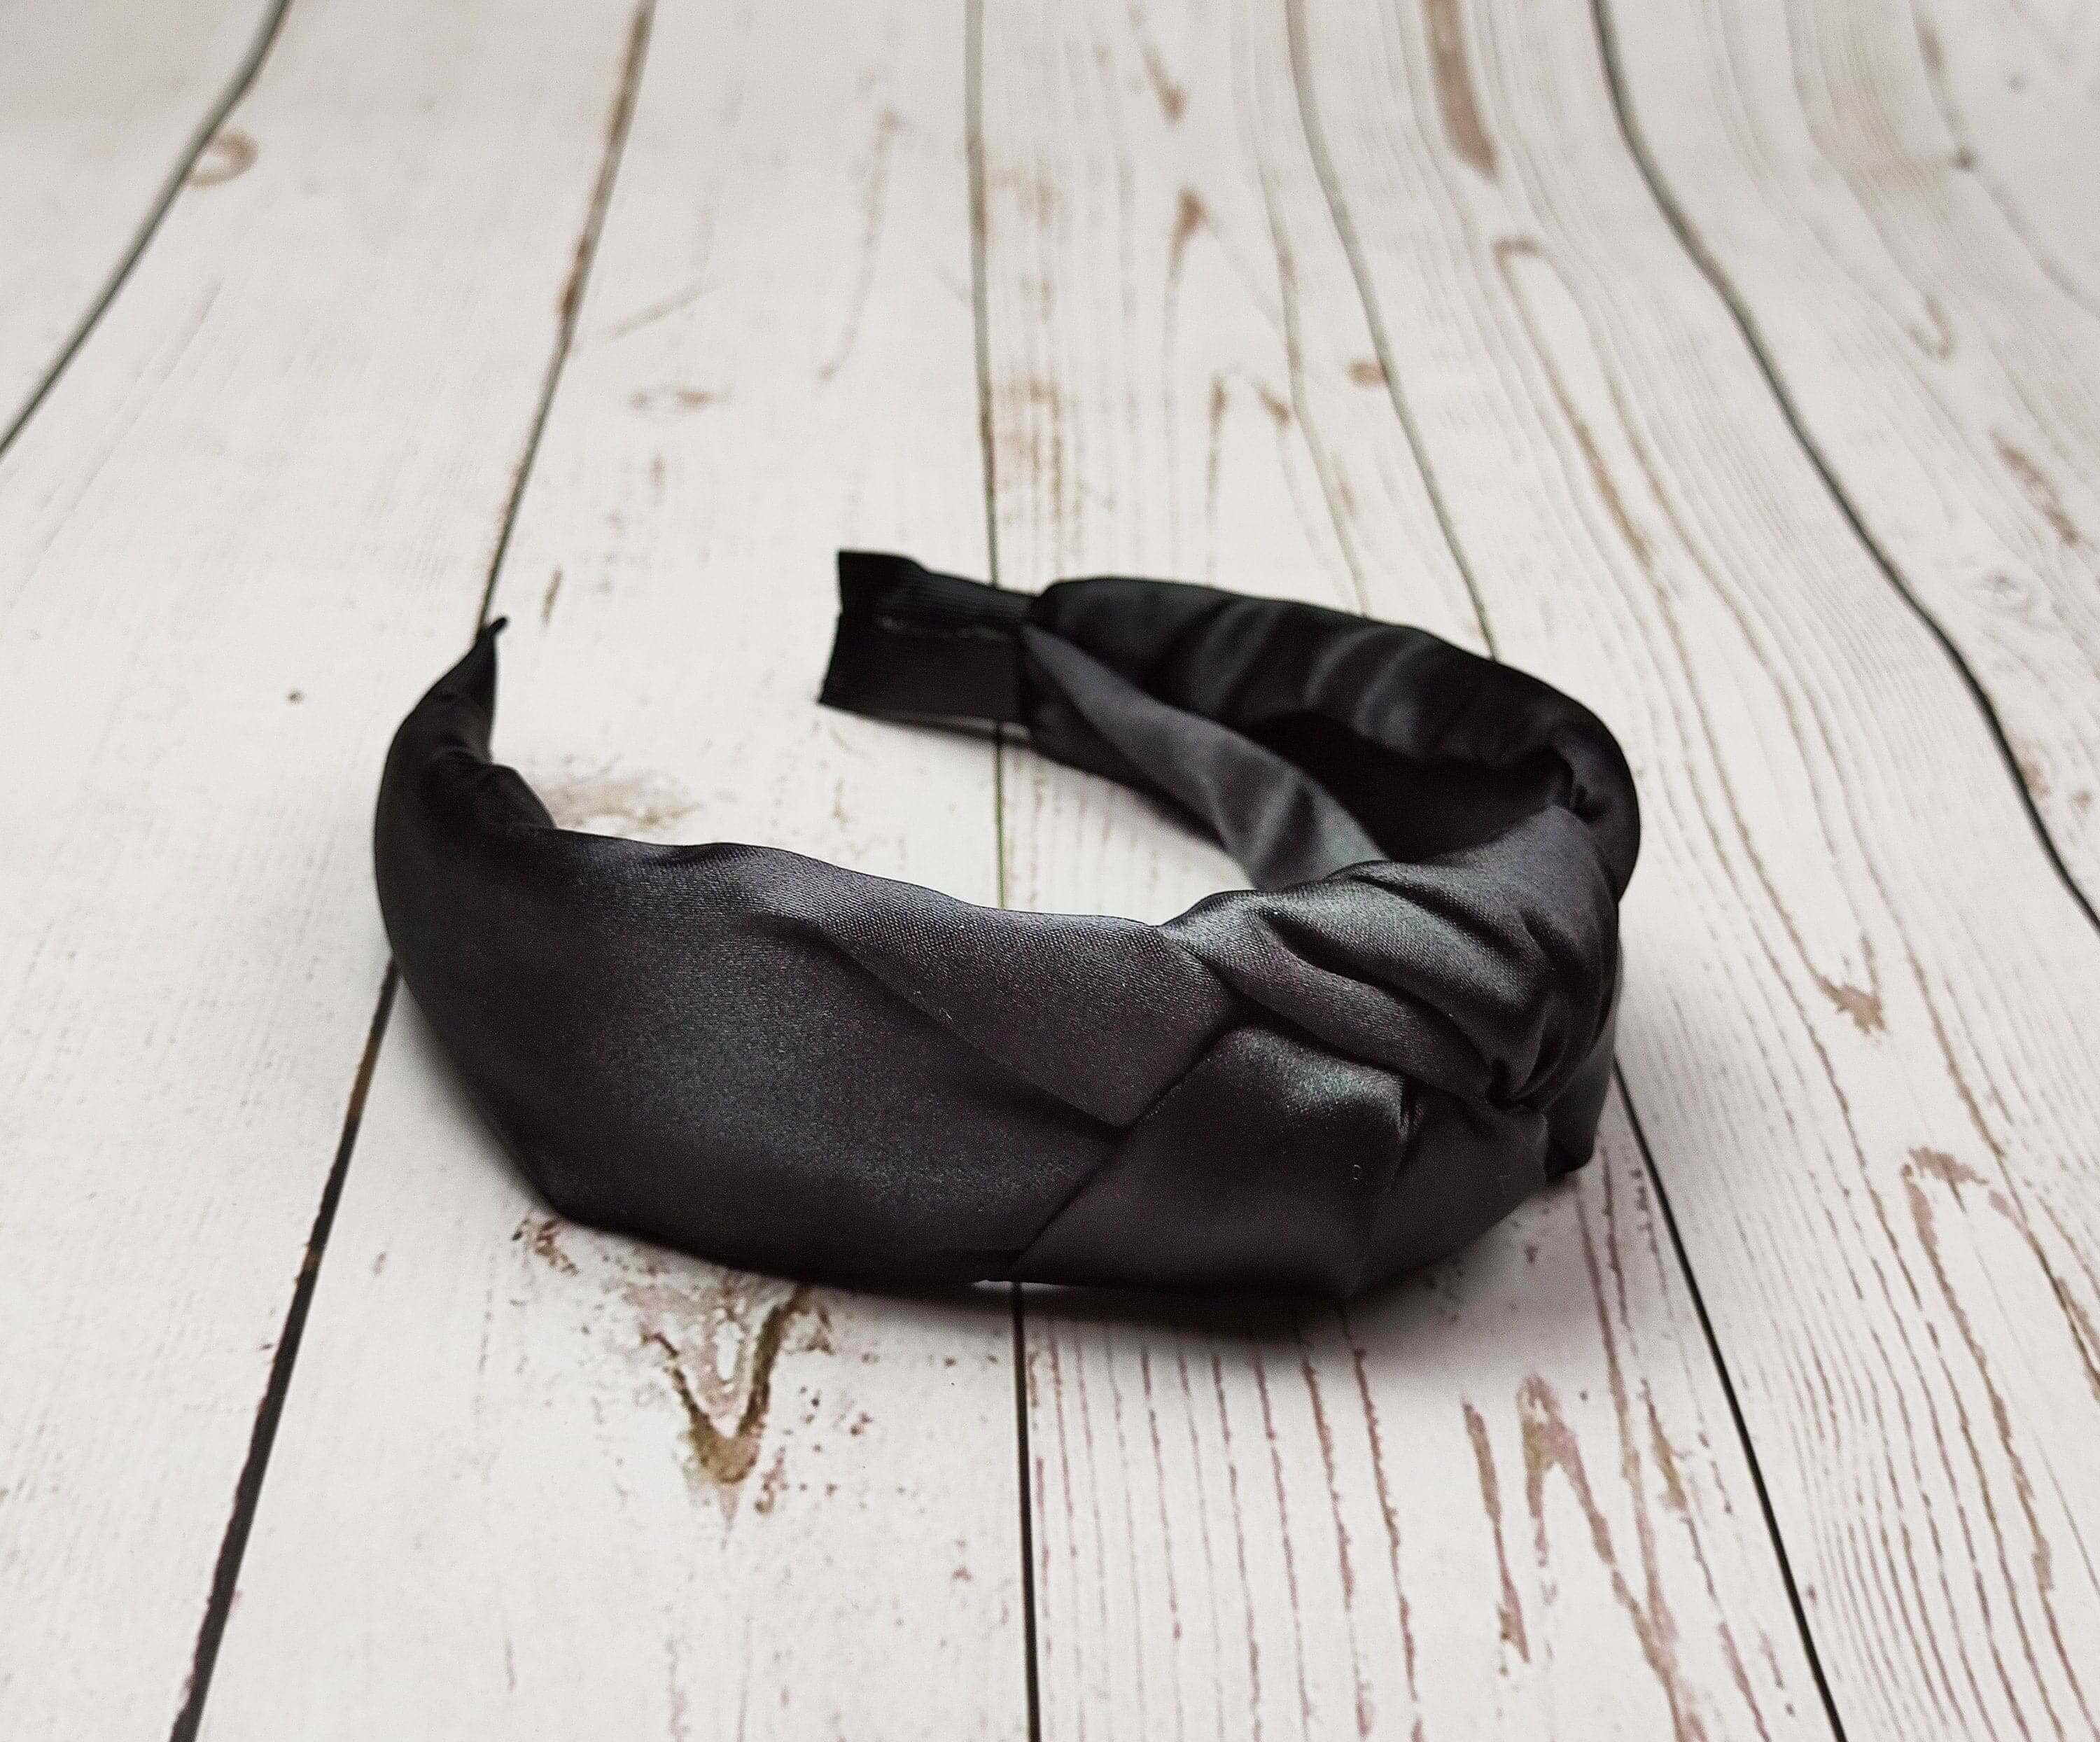 Make a statement with this dark and sophisticated black satin headband for women.